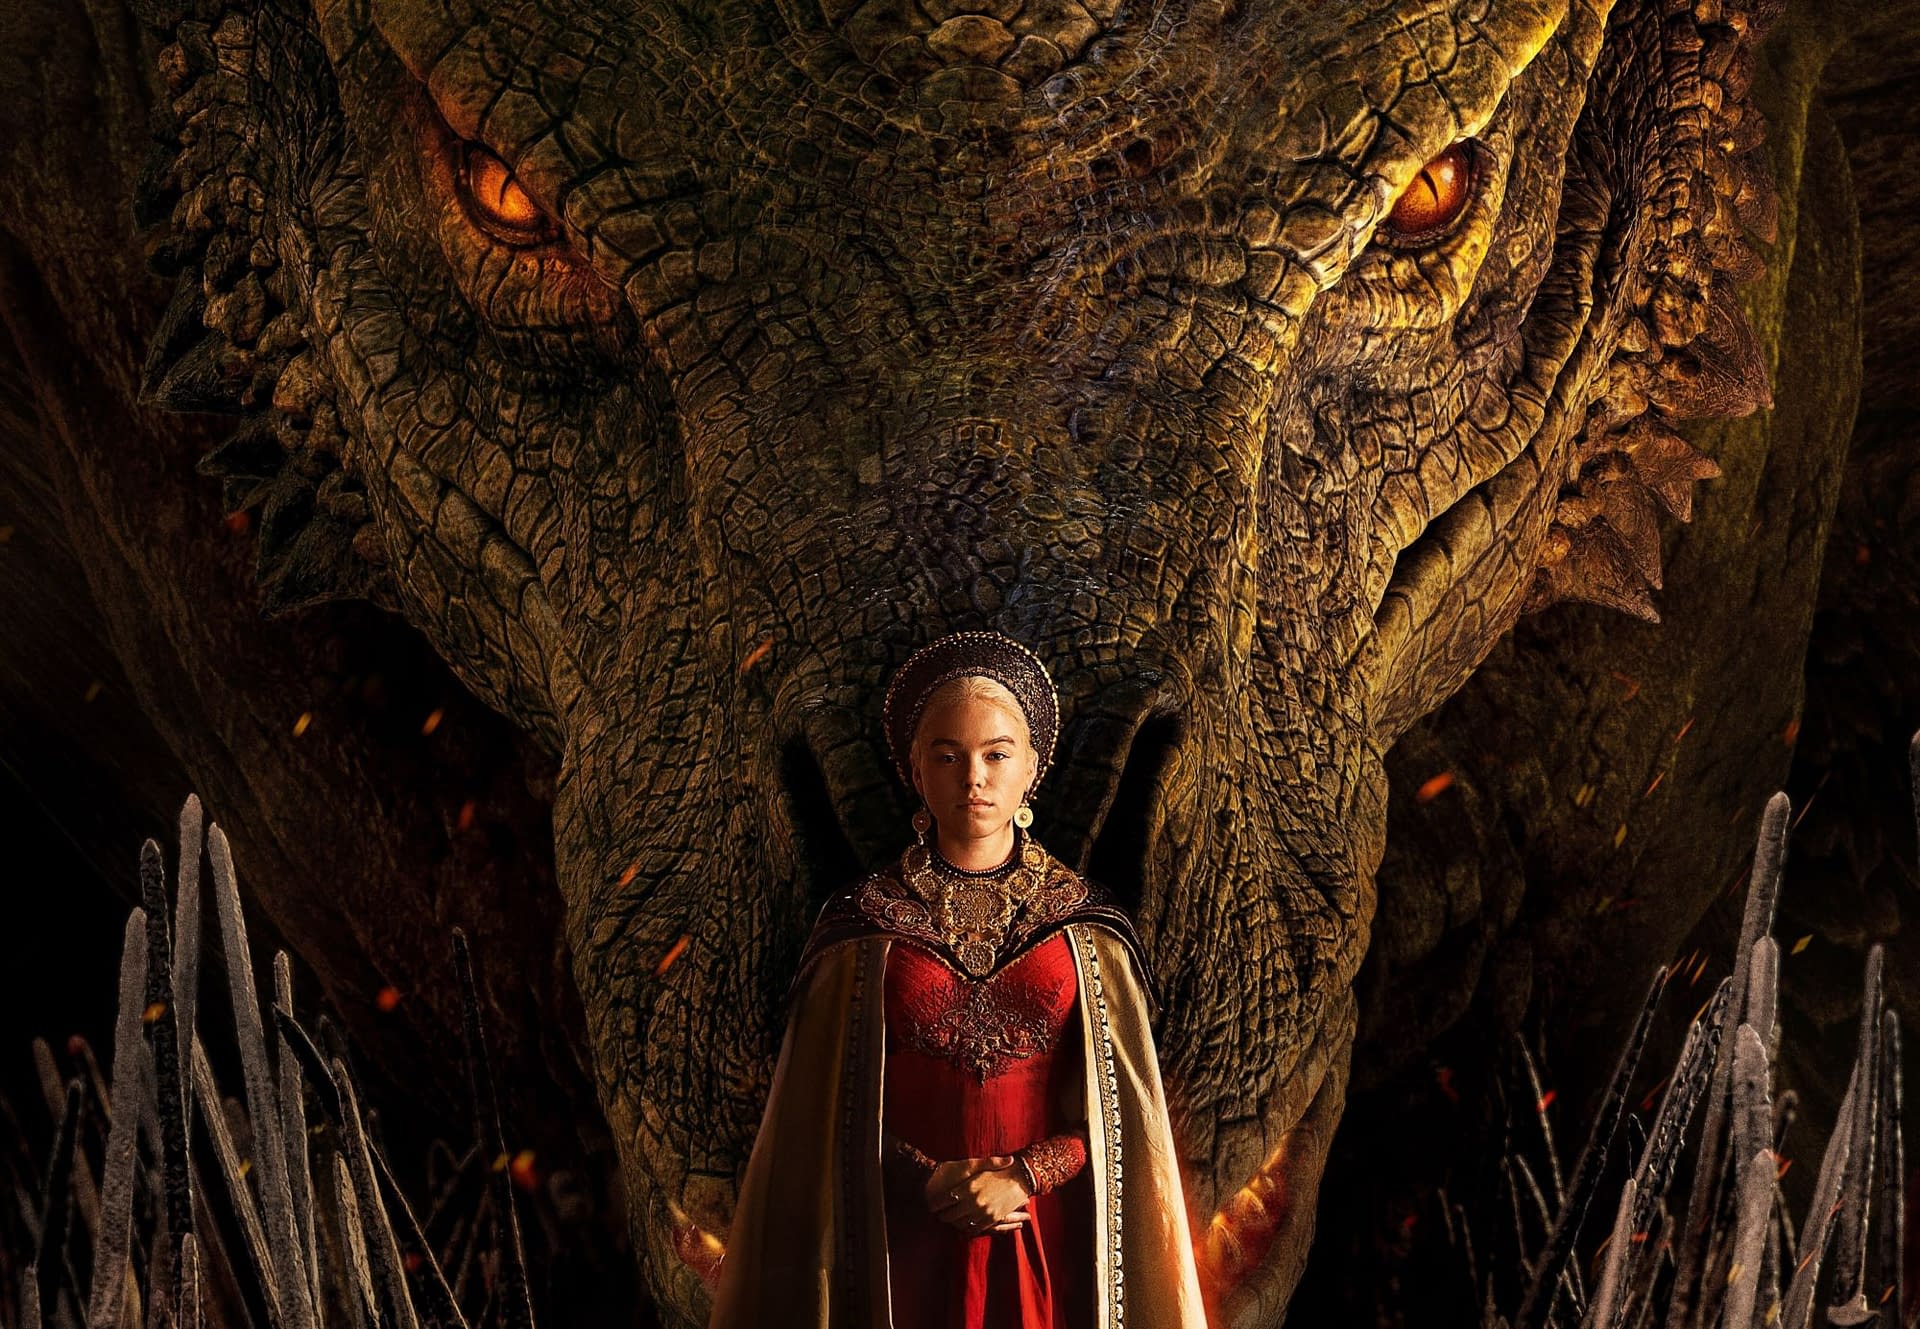 House of the Dragon' Season 2 Won't Have Time Jumps, Says Ryan Condal